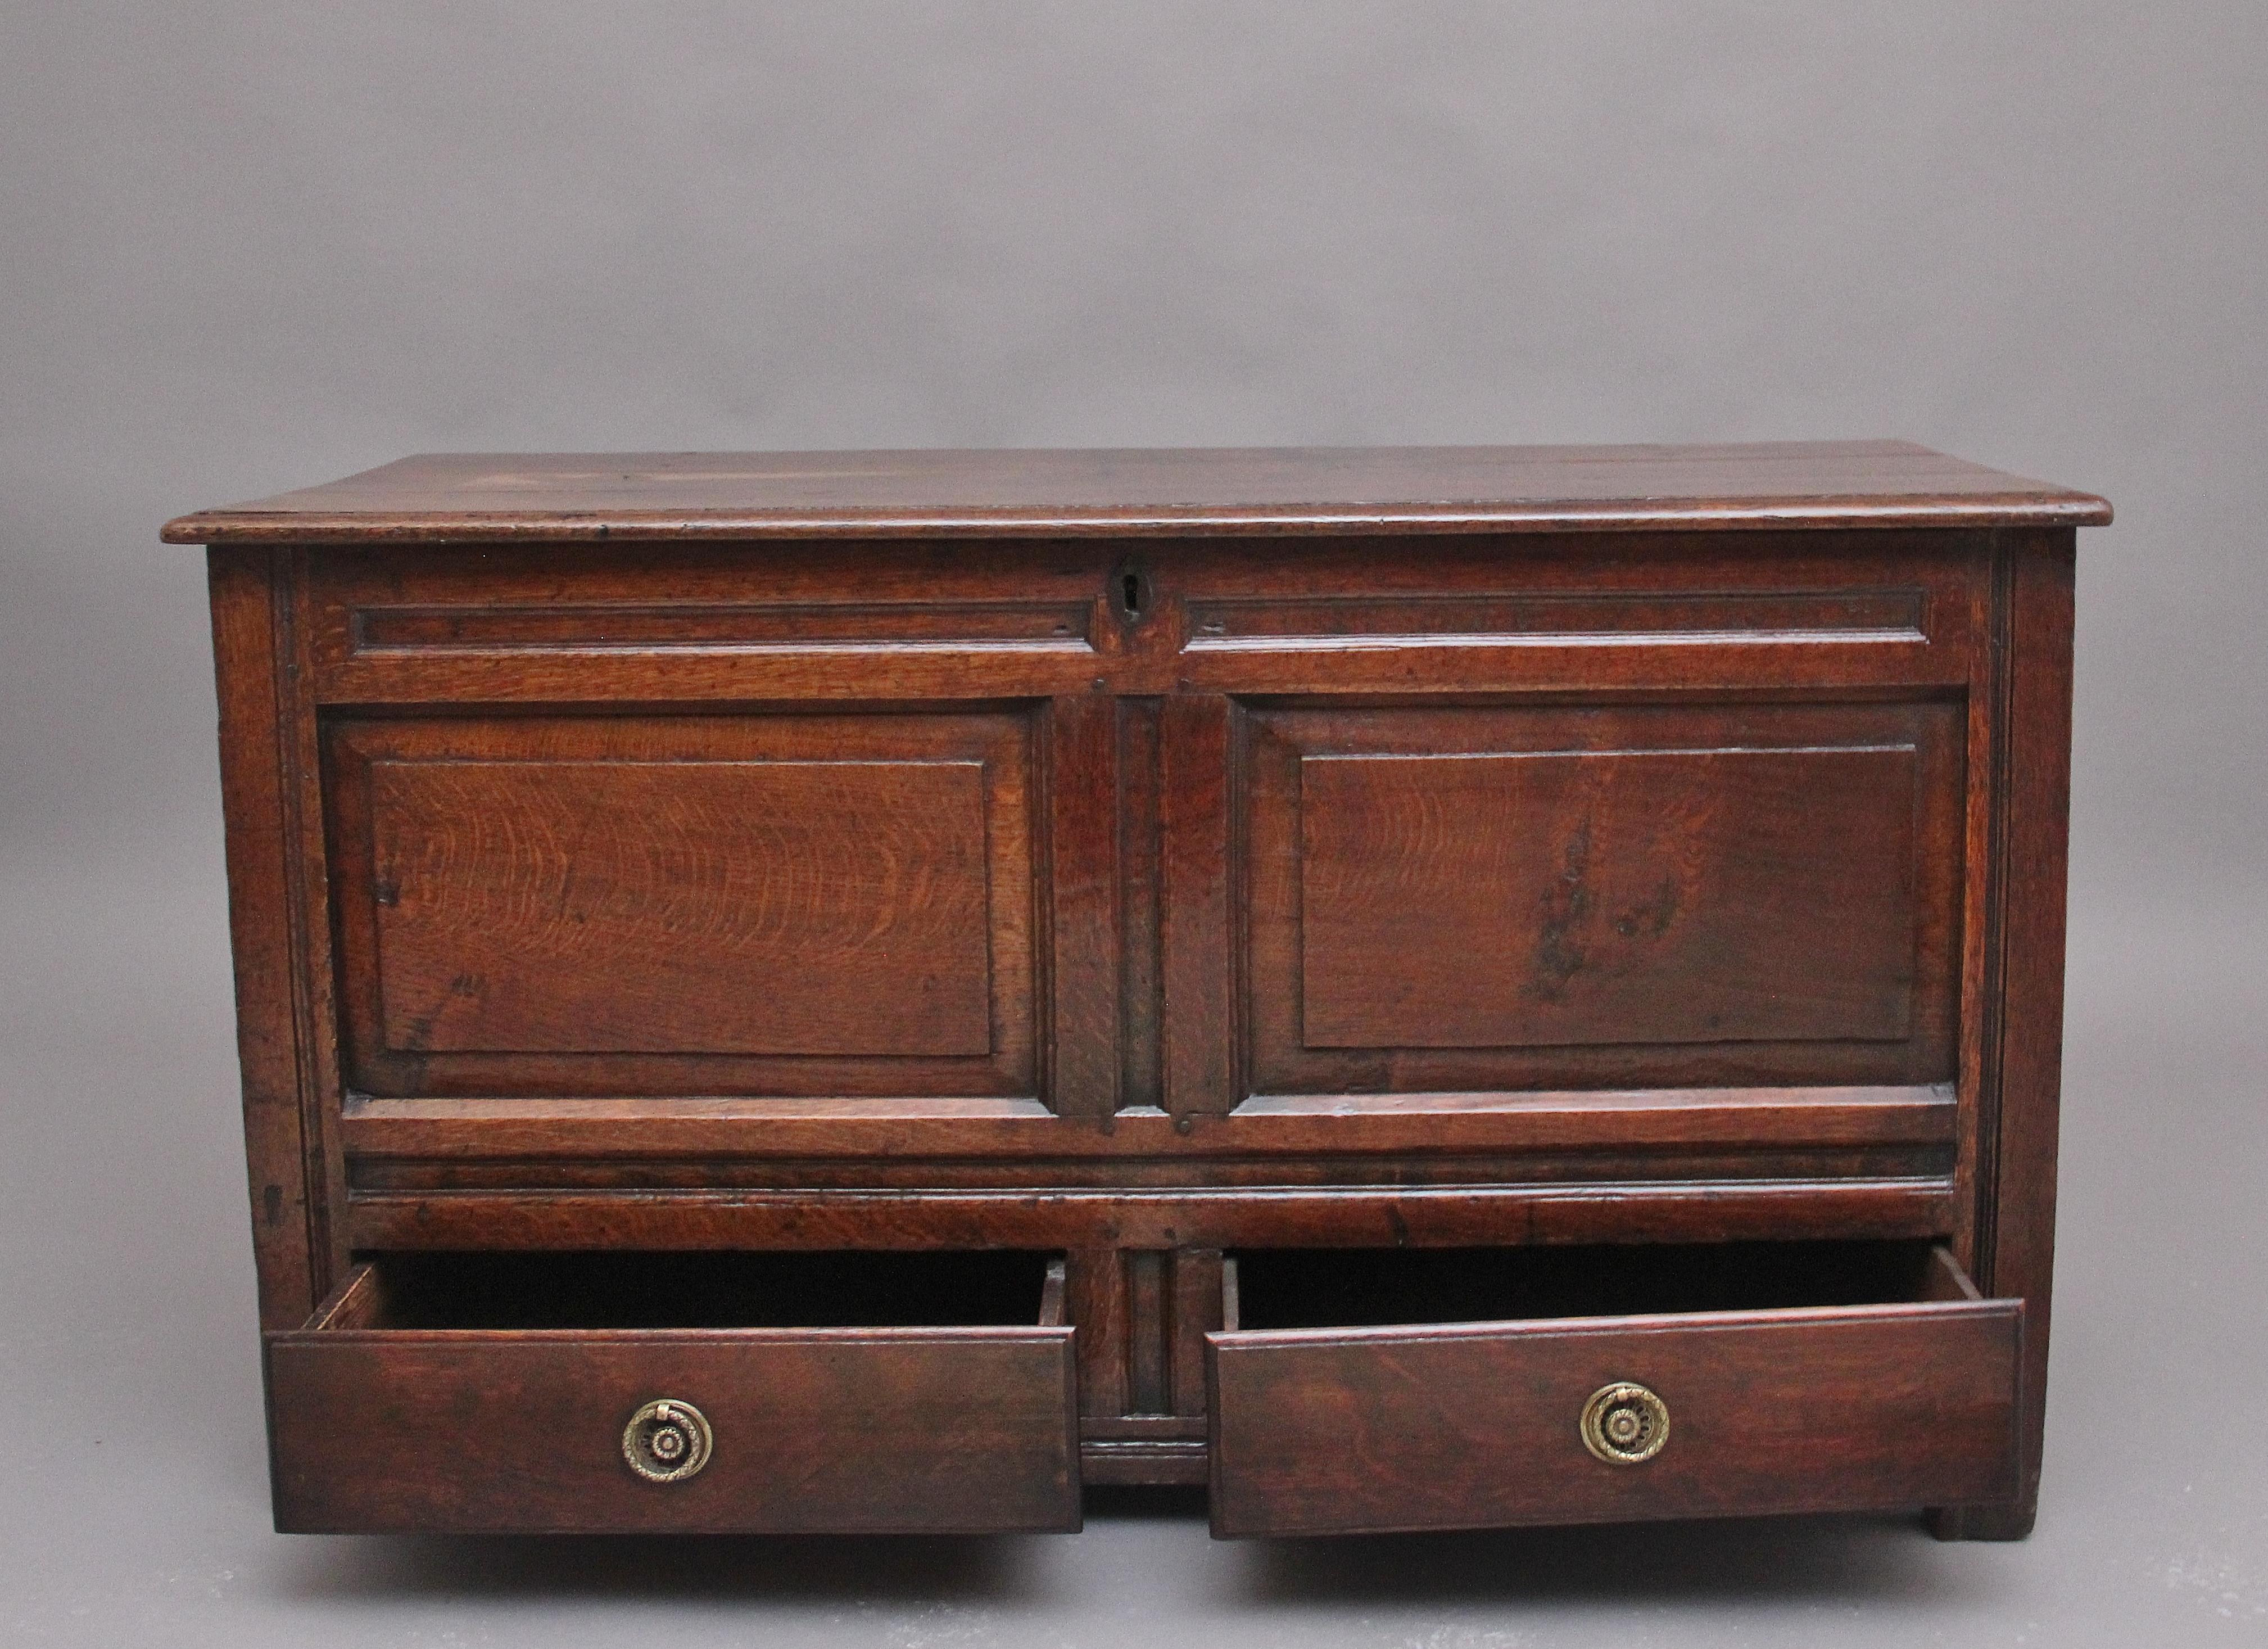 18th Century oak mule chest, the rectangular top opens on the original steel hinges to reveal a large compartment space which includes a candle box to the left, panelled sides and having fielded panels to the front of the chest with two drawers at